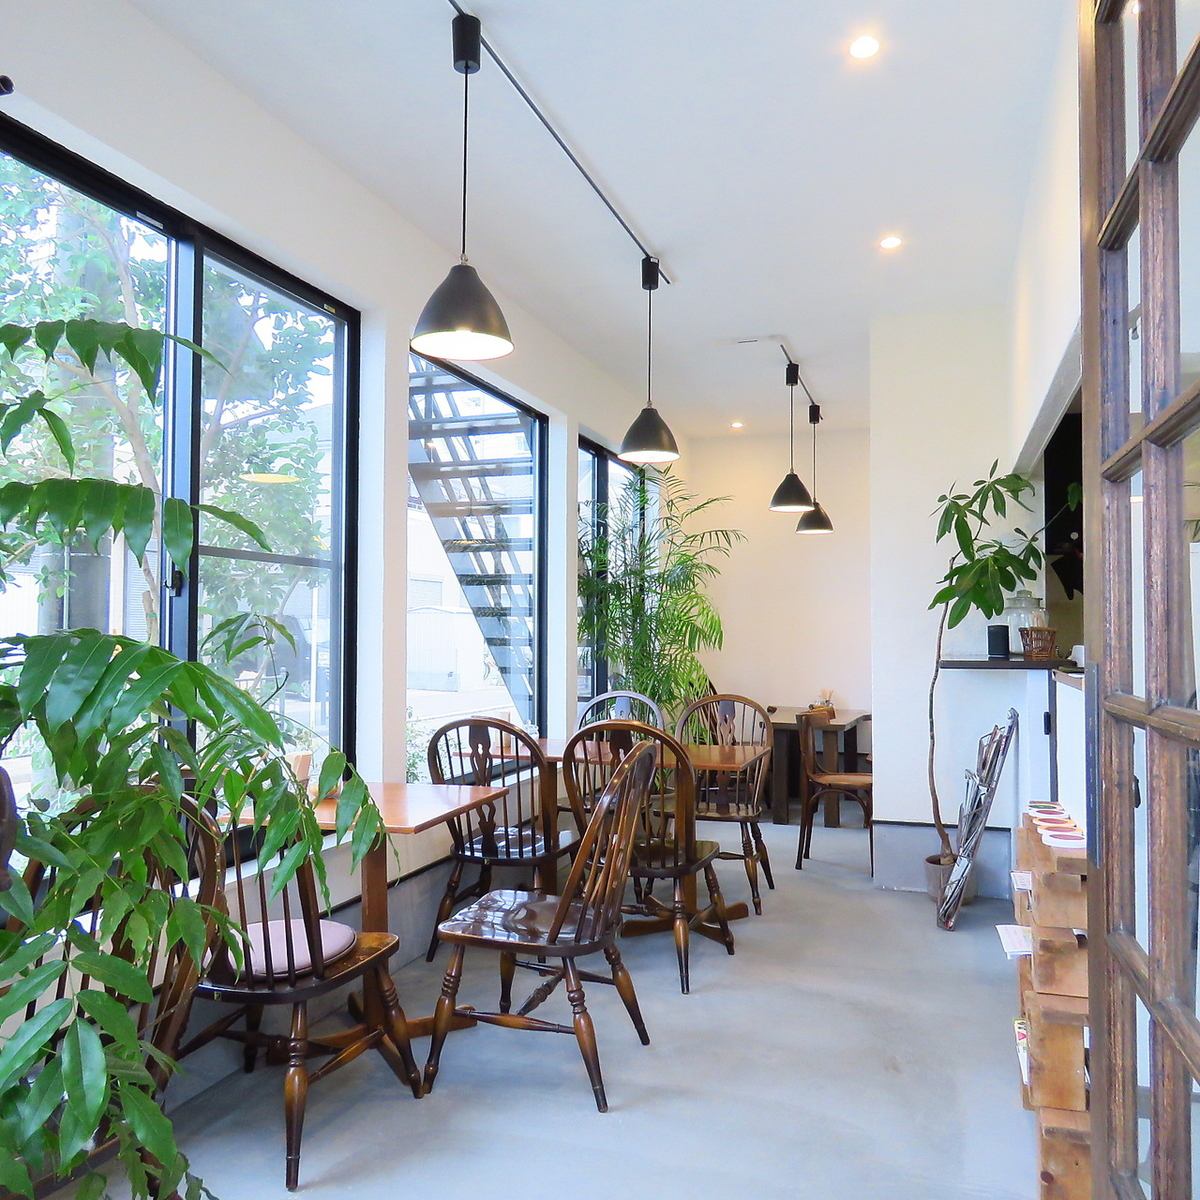 Reopened in October 2019 ◆ Cafe where nature, people and people are in harmony